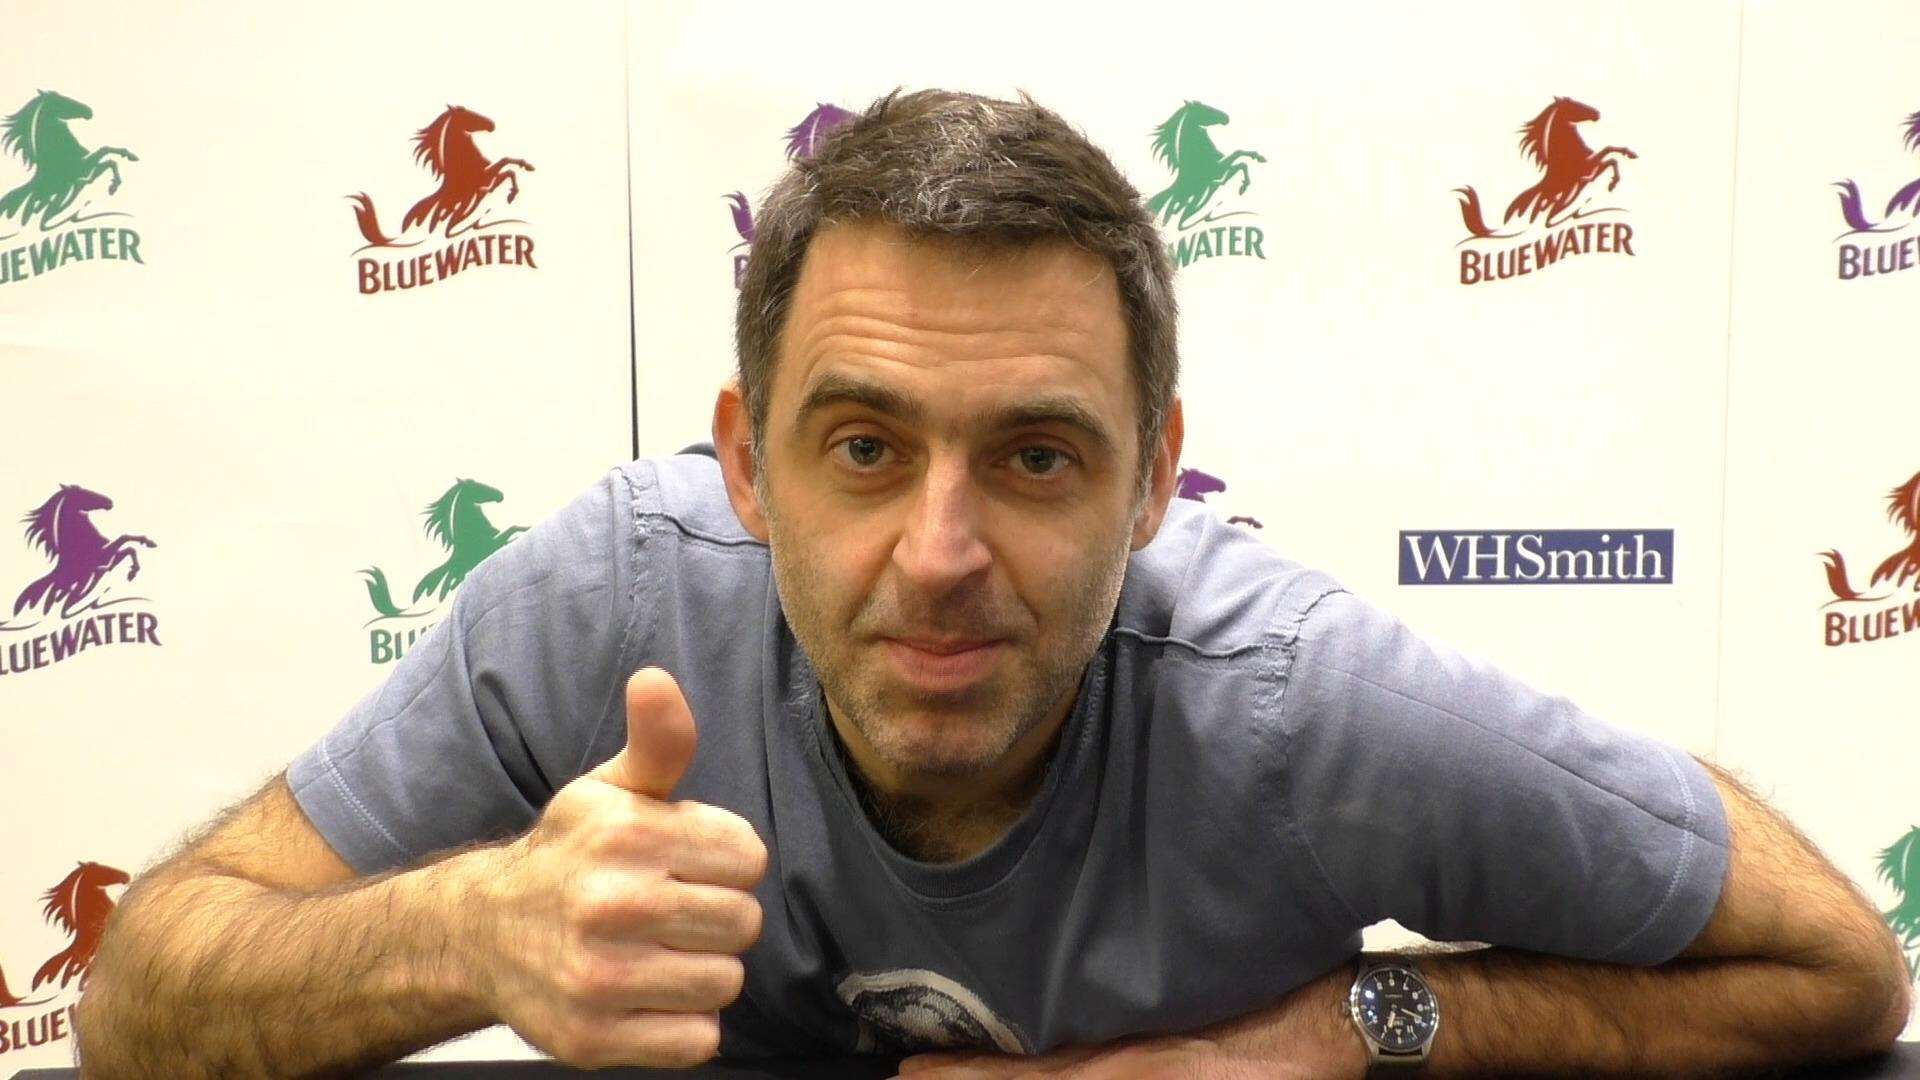 Ronnie O'Sullivan was at Bluewater meeting fans and signing his book